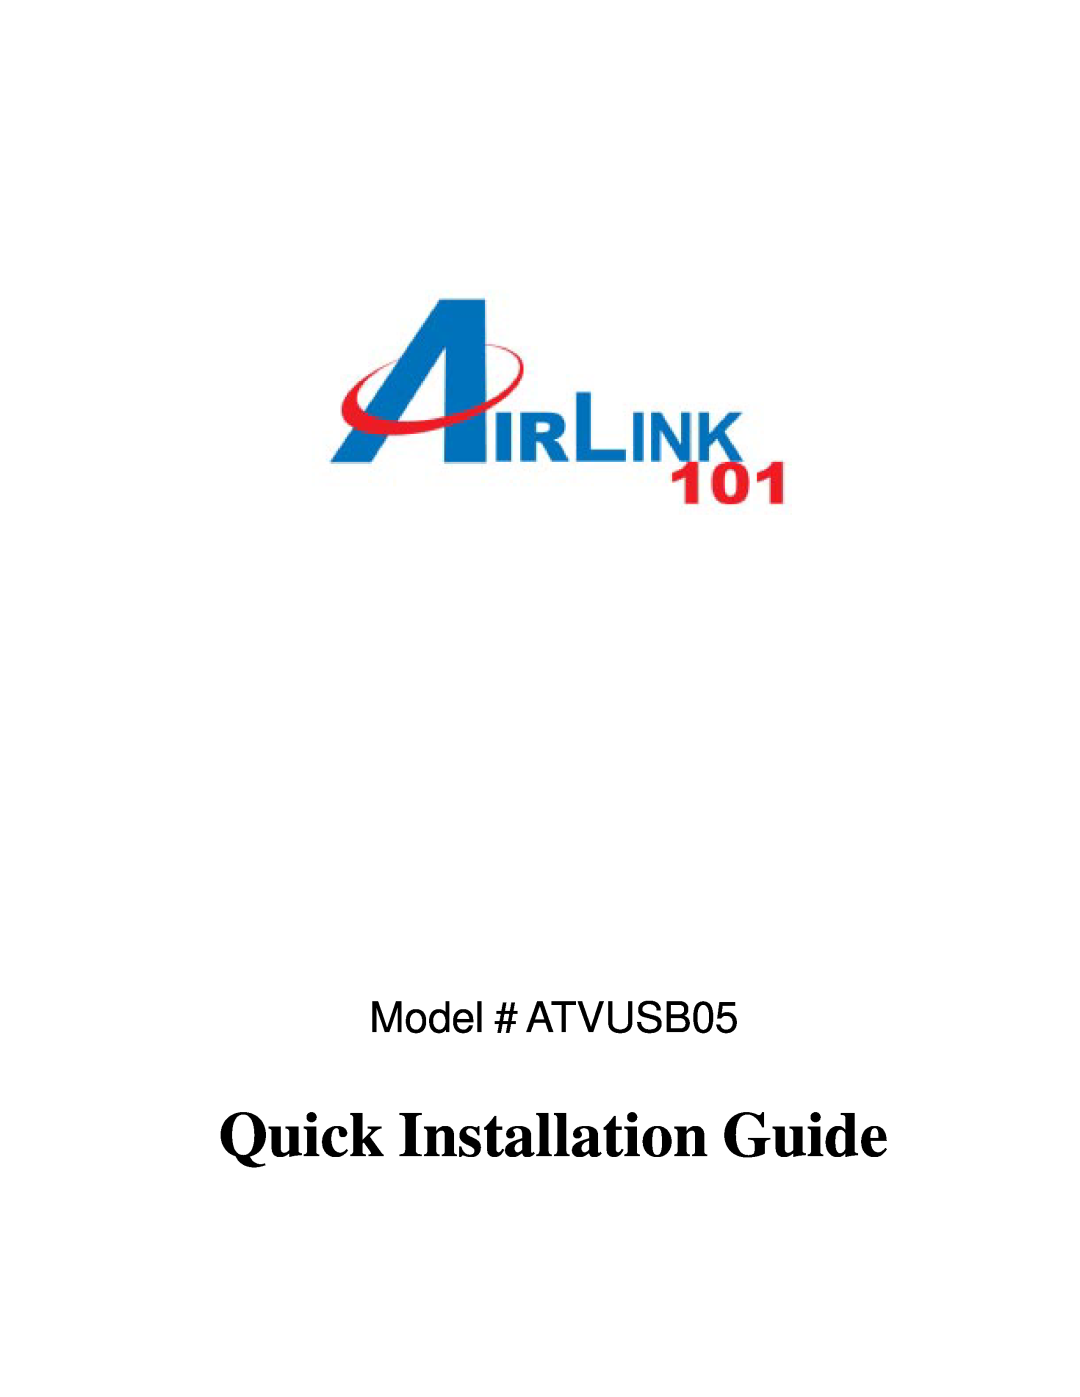 Airlink101 manual Model # ATVUSB05, VER. 1A 